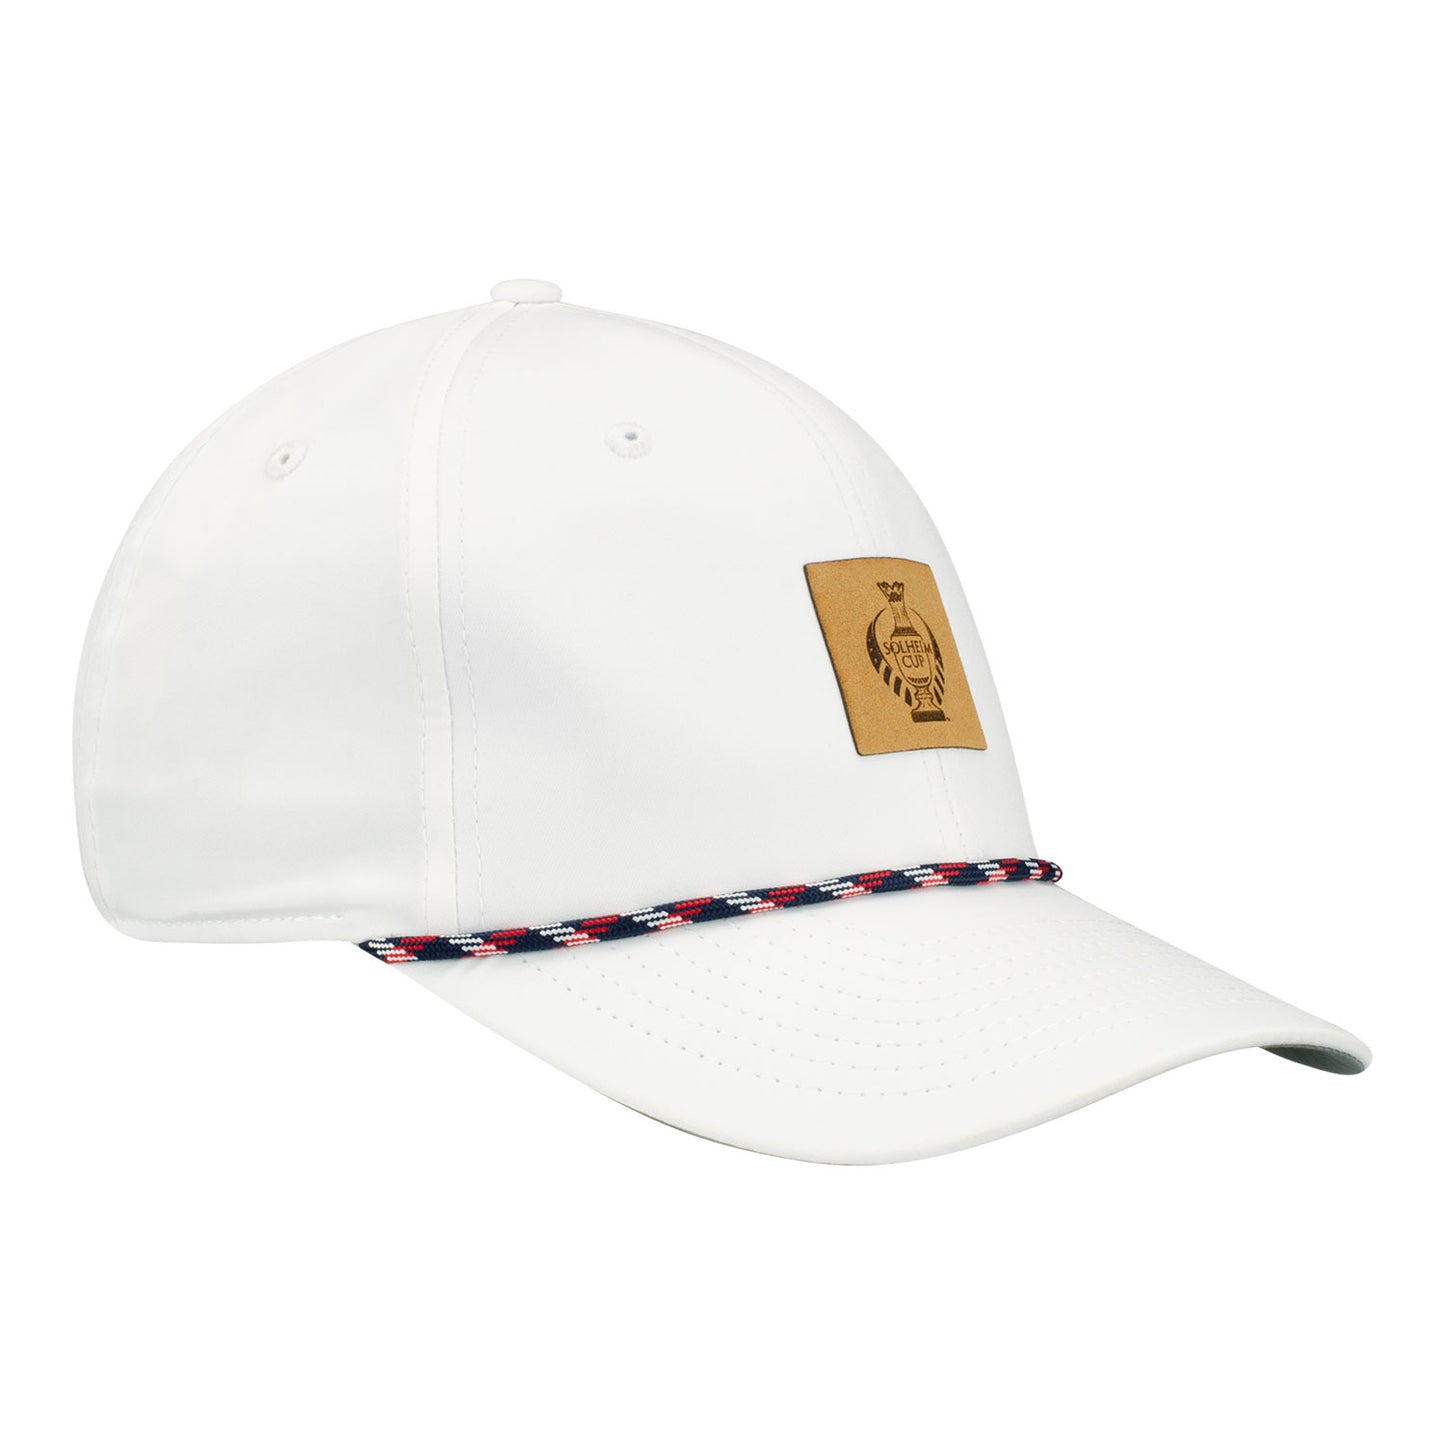 Imperial LPGA Men's Rope Hat featuring the Solheim Cup Trophy - Angled Right Side View